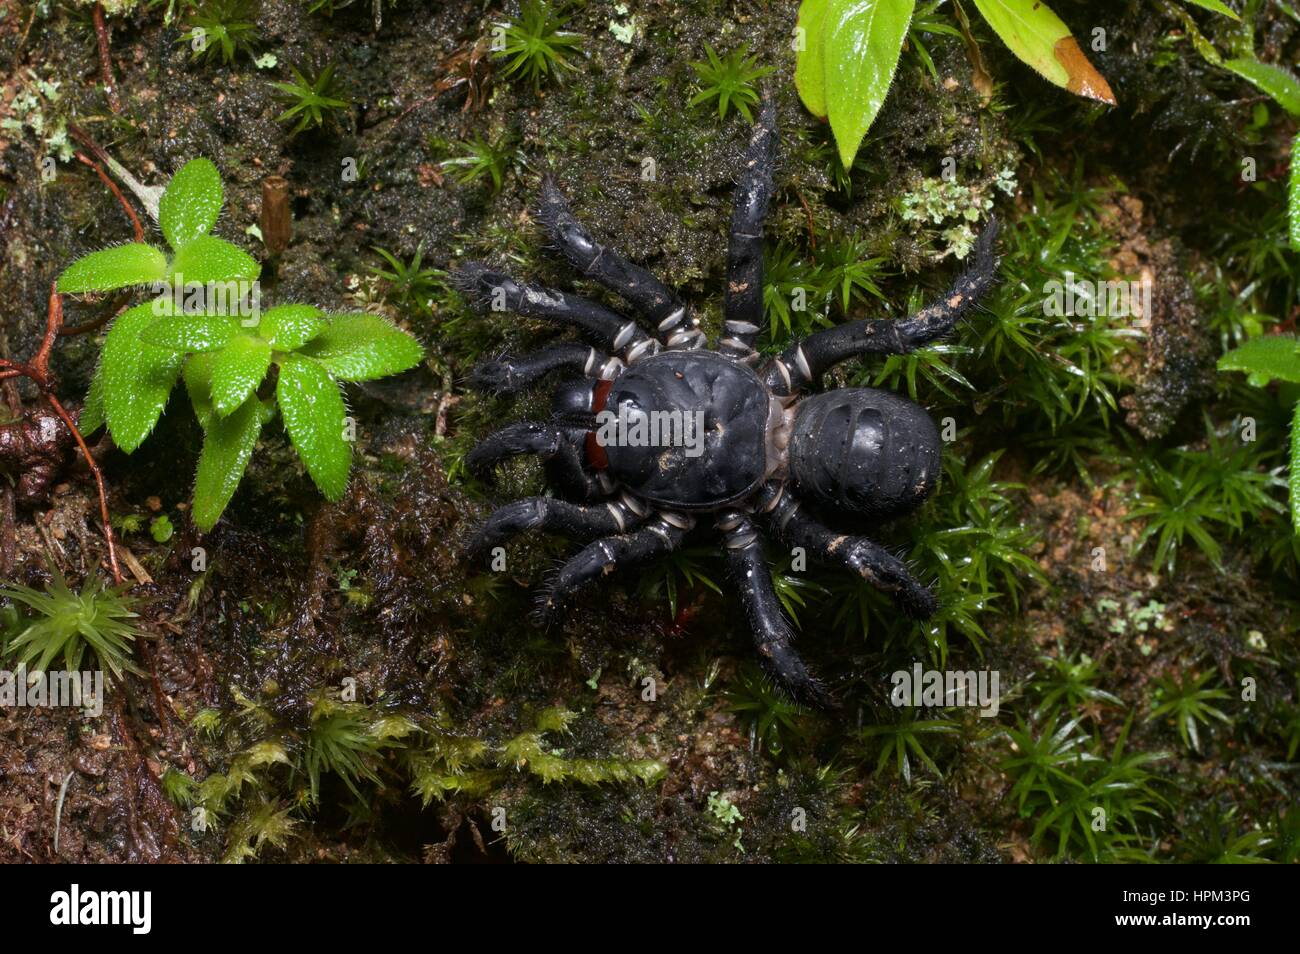 A Malaysian Black Trapdoor Spider (Liphistius malayanus) in the rainforest at Fraser's Hill, Pahang, Malaysia Stock Photo